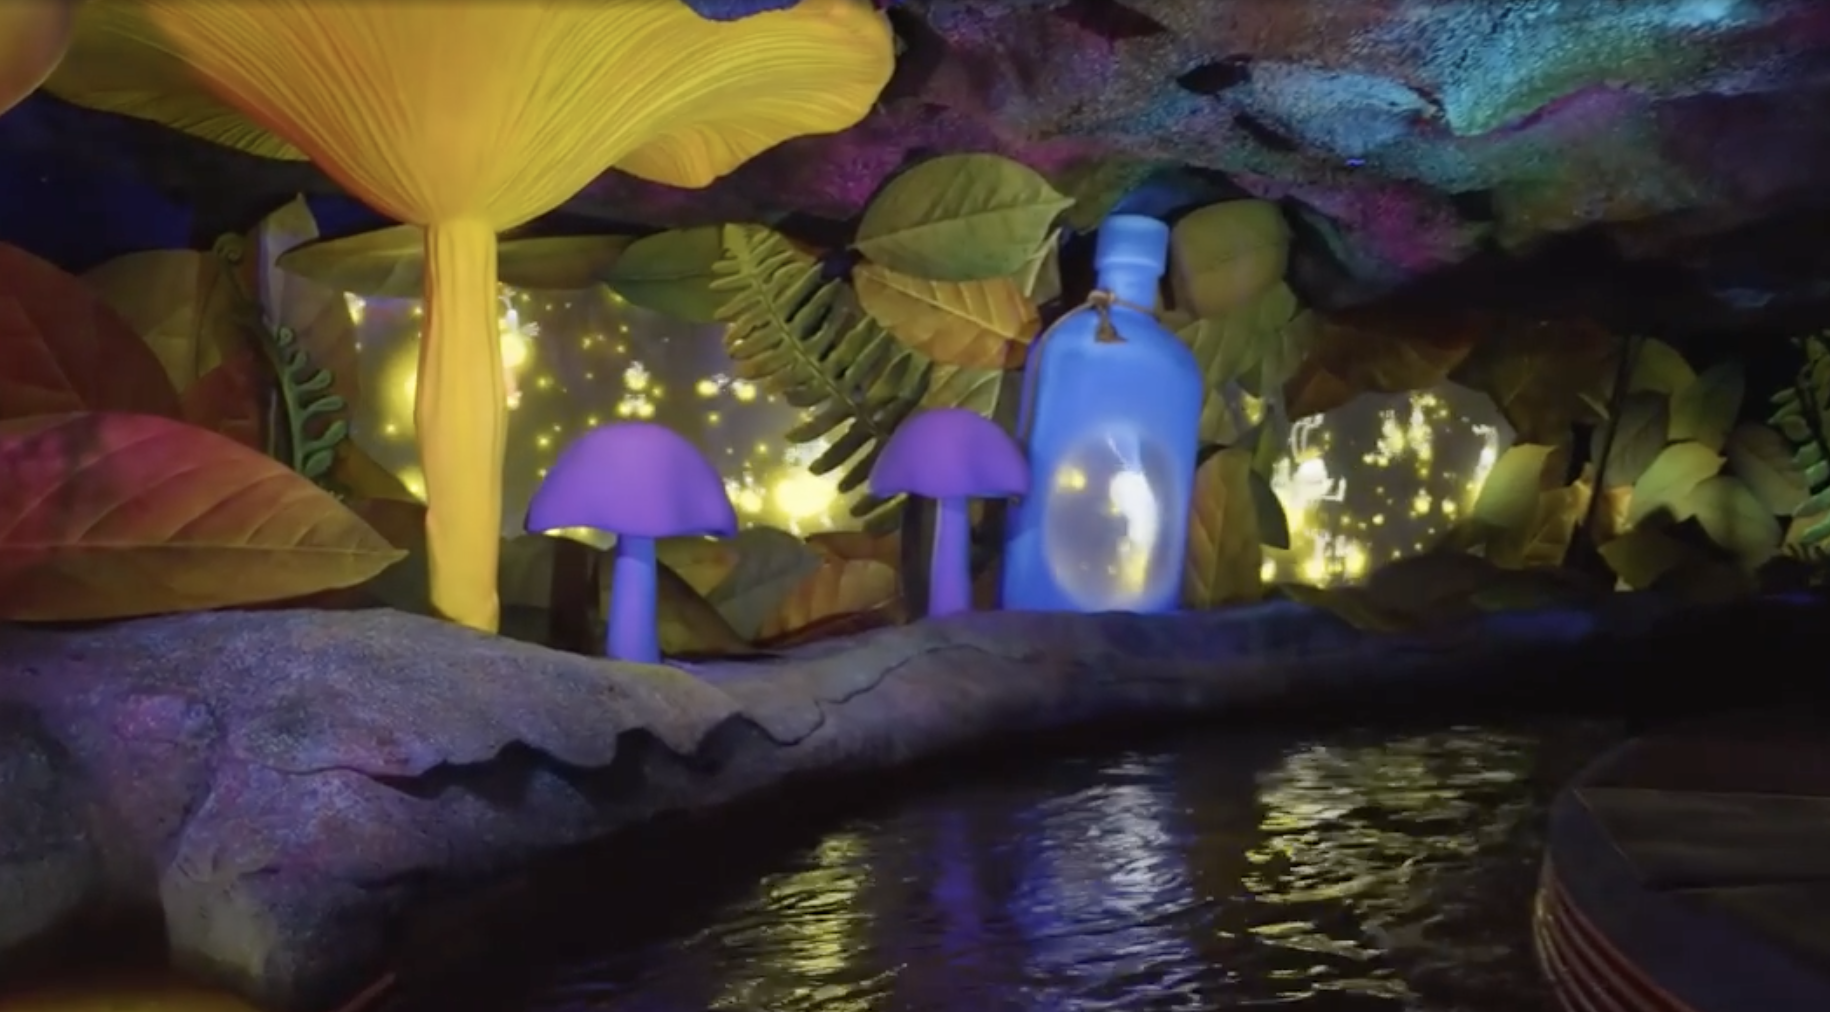 Animated scene of a fantastical cave with glowing mushrooms, leaves, and a large bottle emitting light. A serene water stream runs through the cave